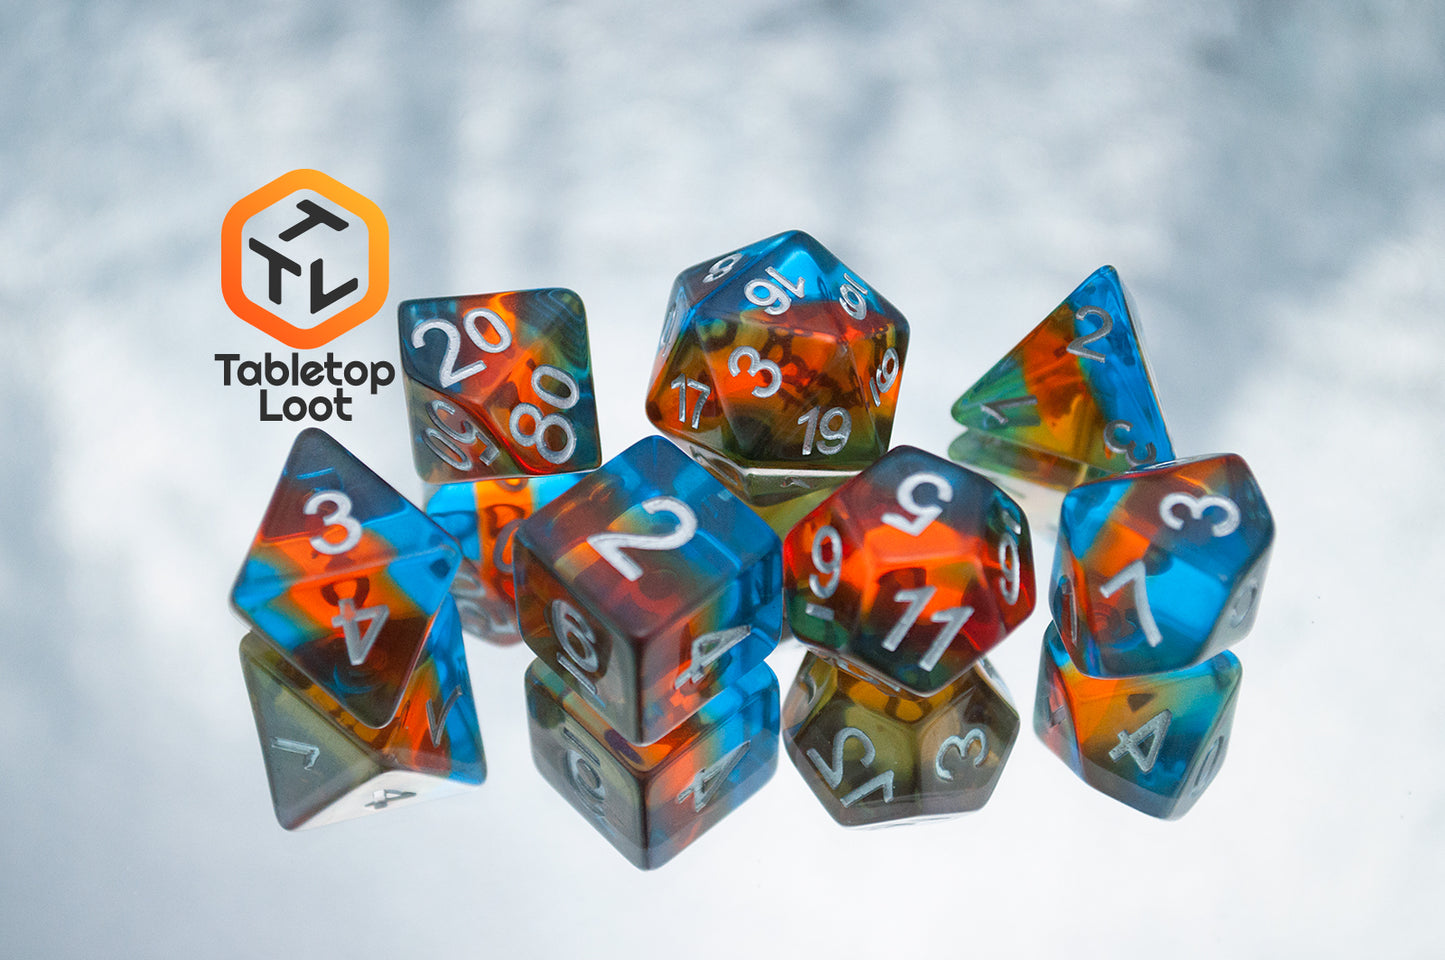 The Parallel Universes 7 piece dice set from Tabletop Loot with an orange stripe in blue resin and silver numbering.